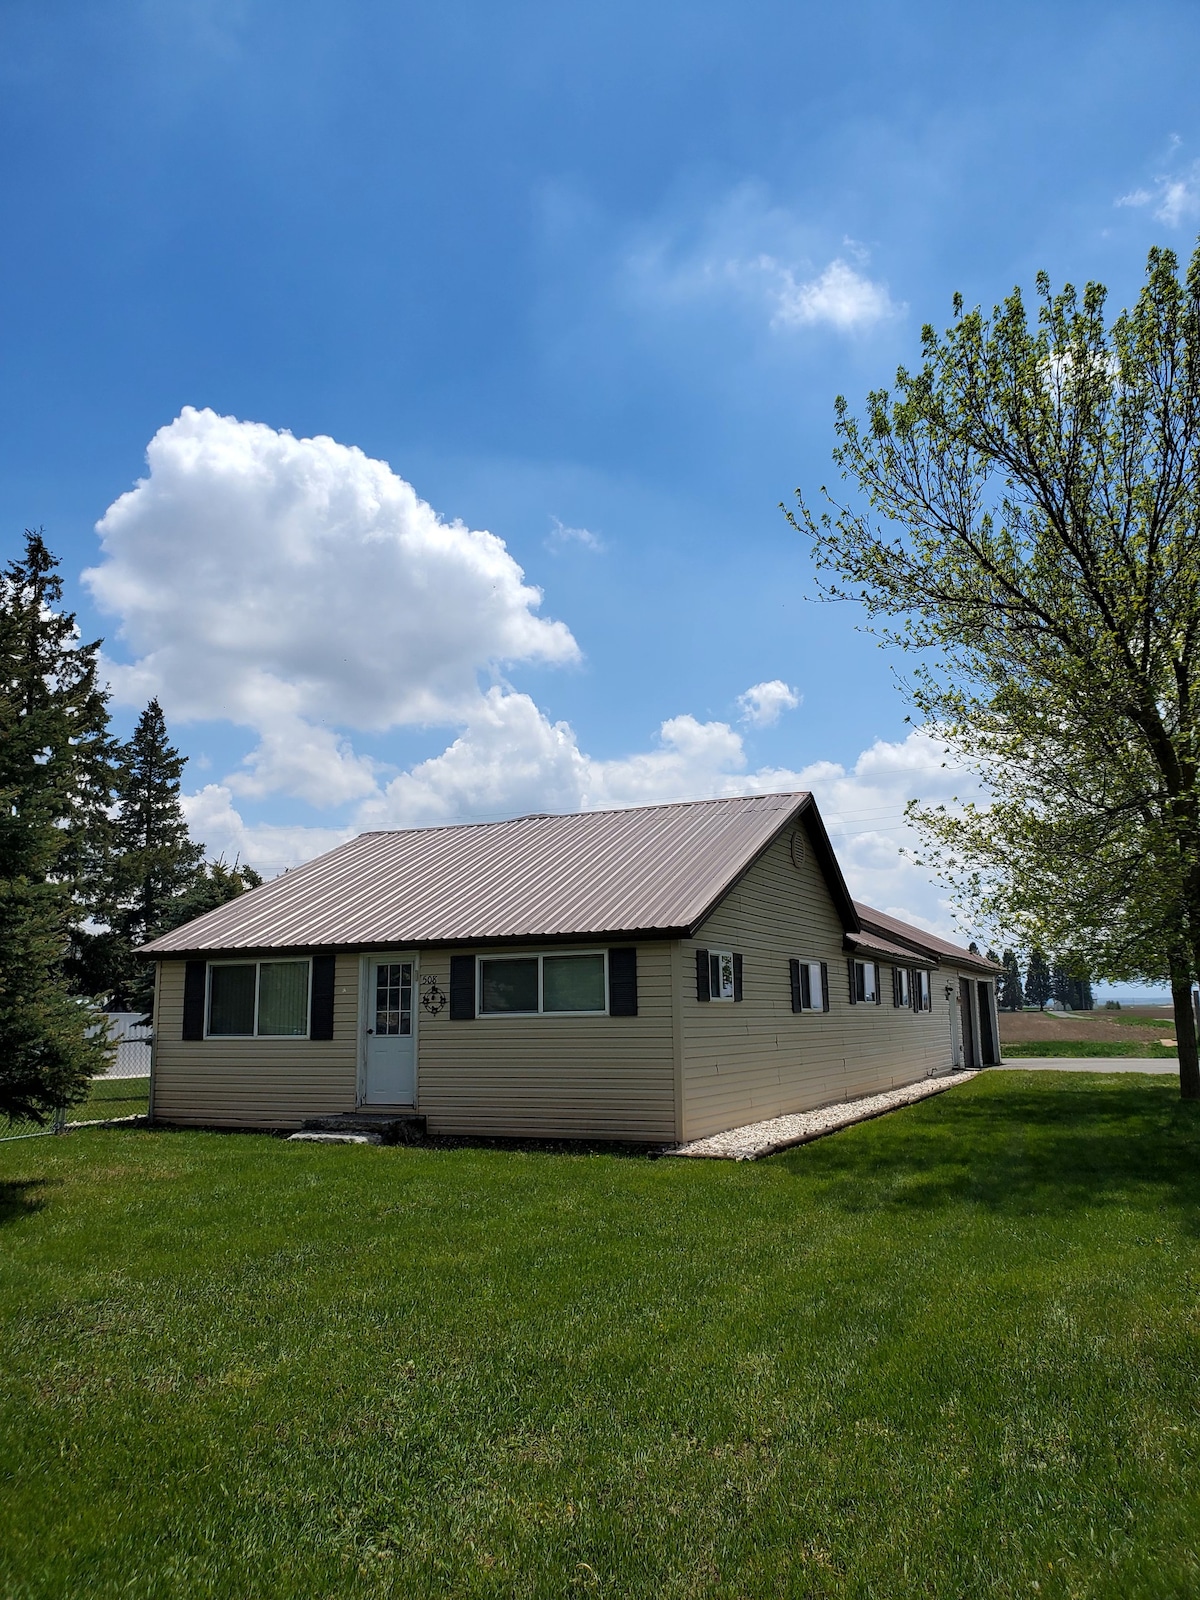 Town & County Home, Dogs Welcome, RV Space Option